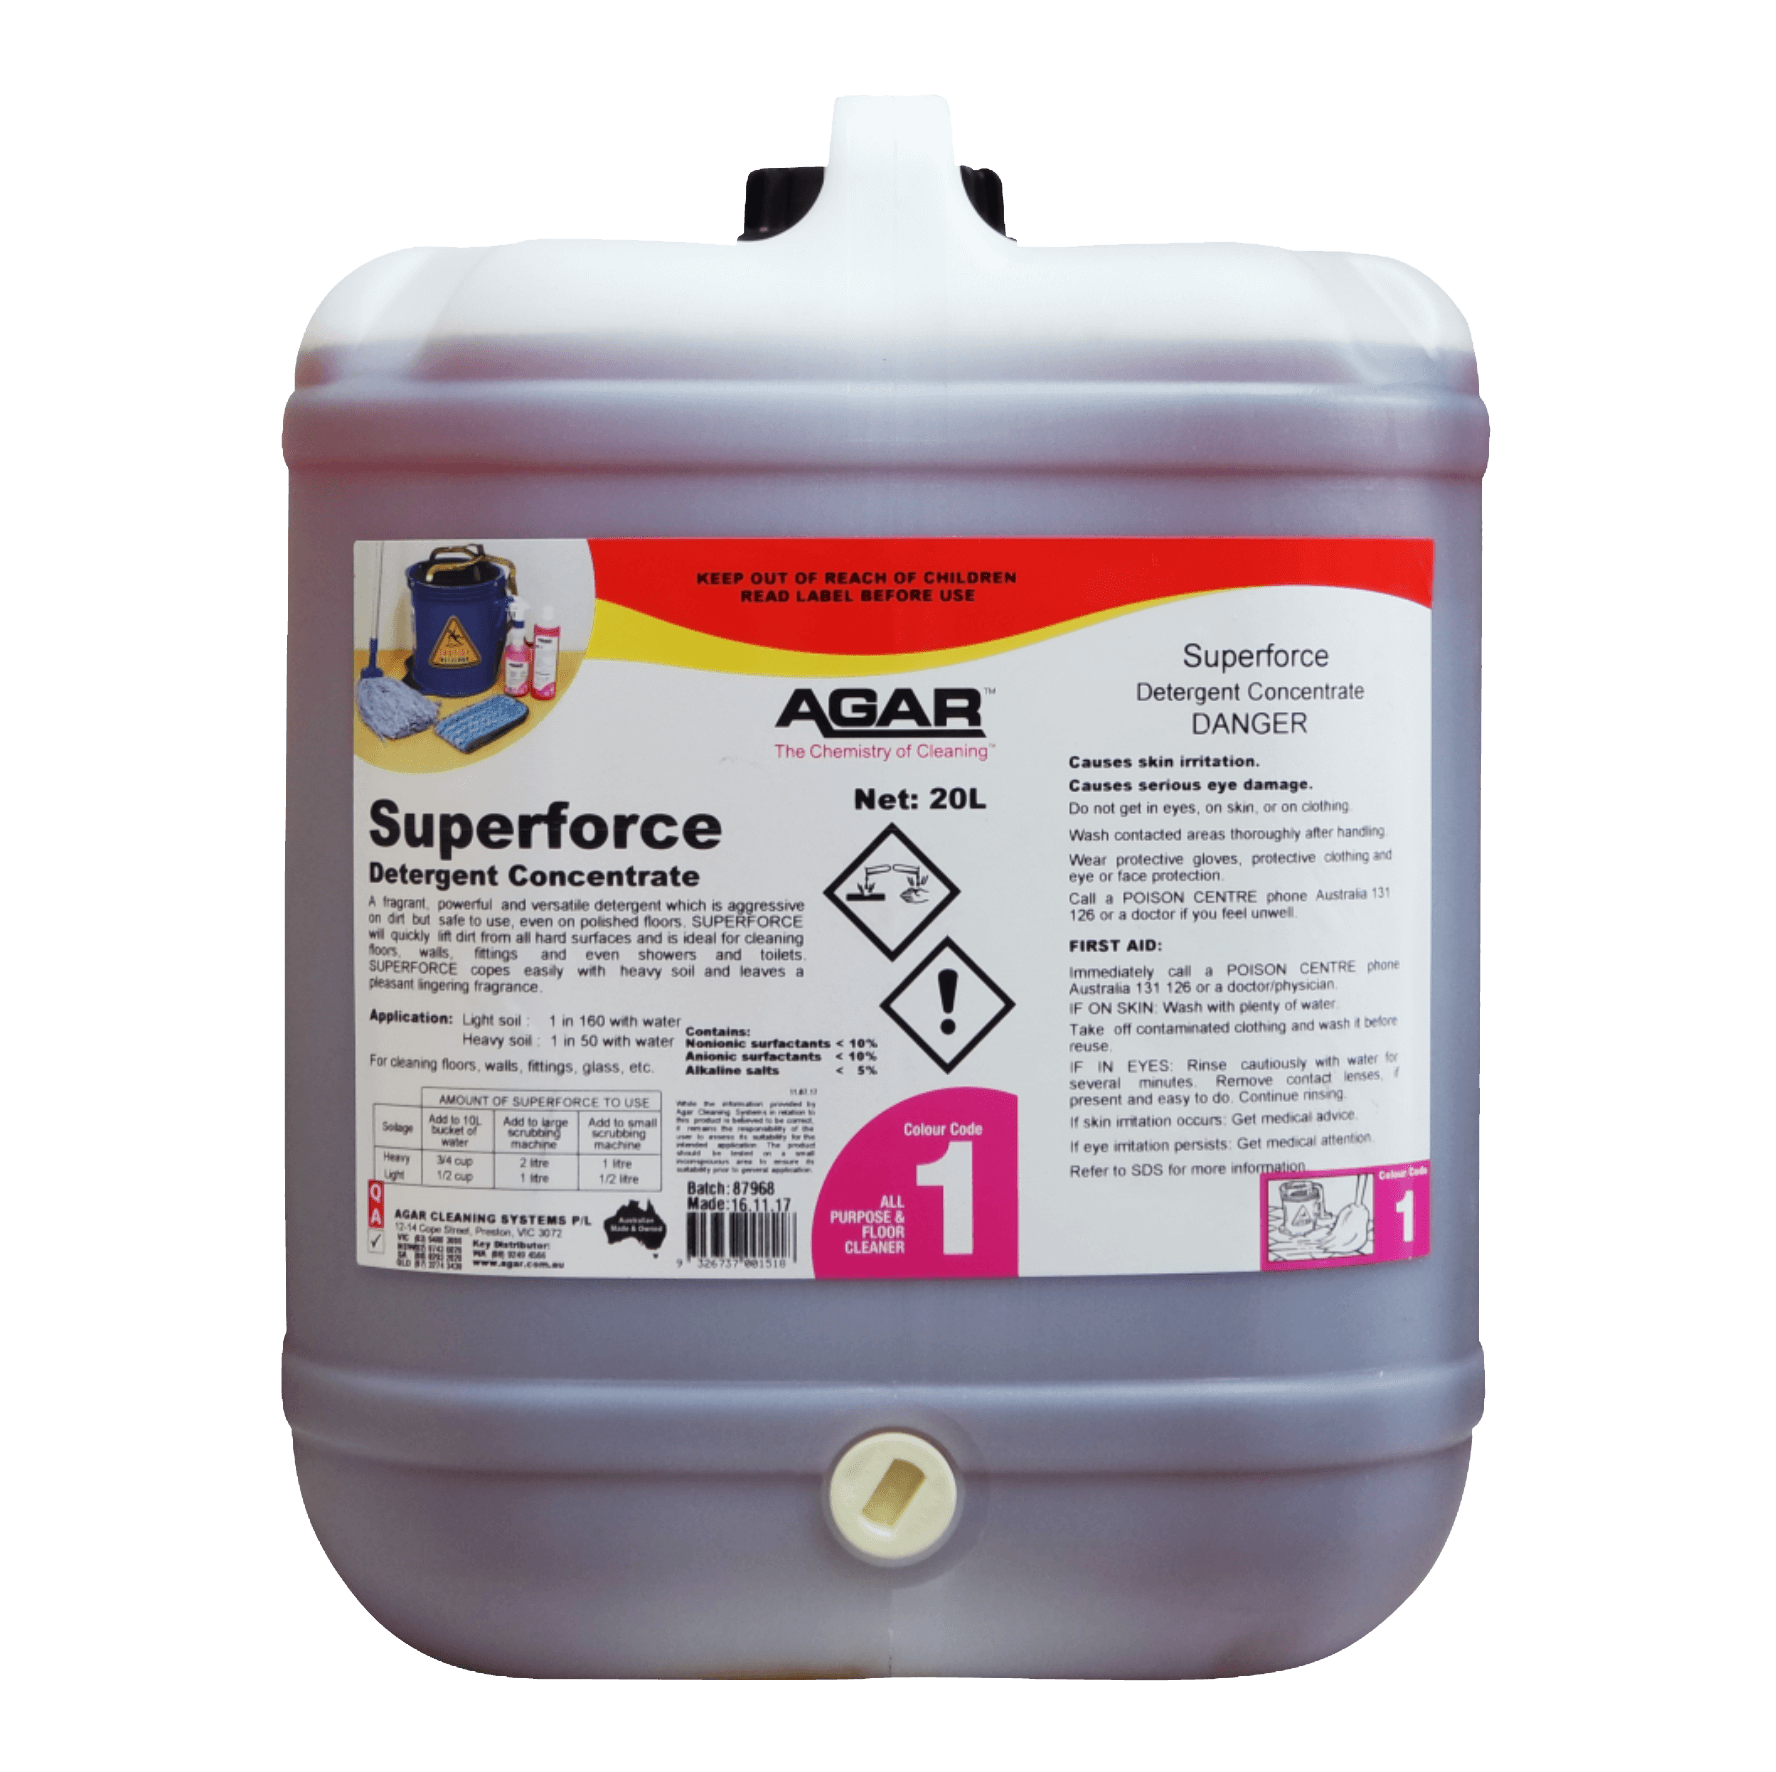 Superforce Detergent Concentrate